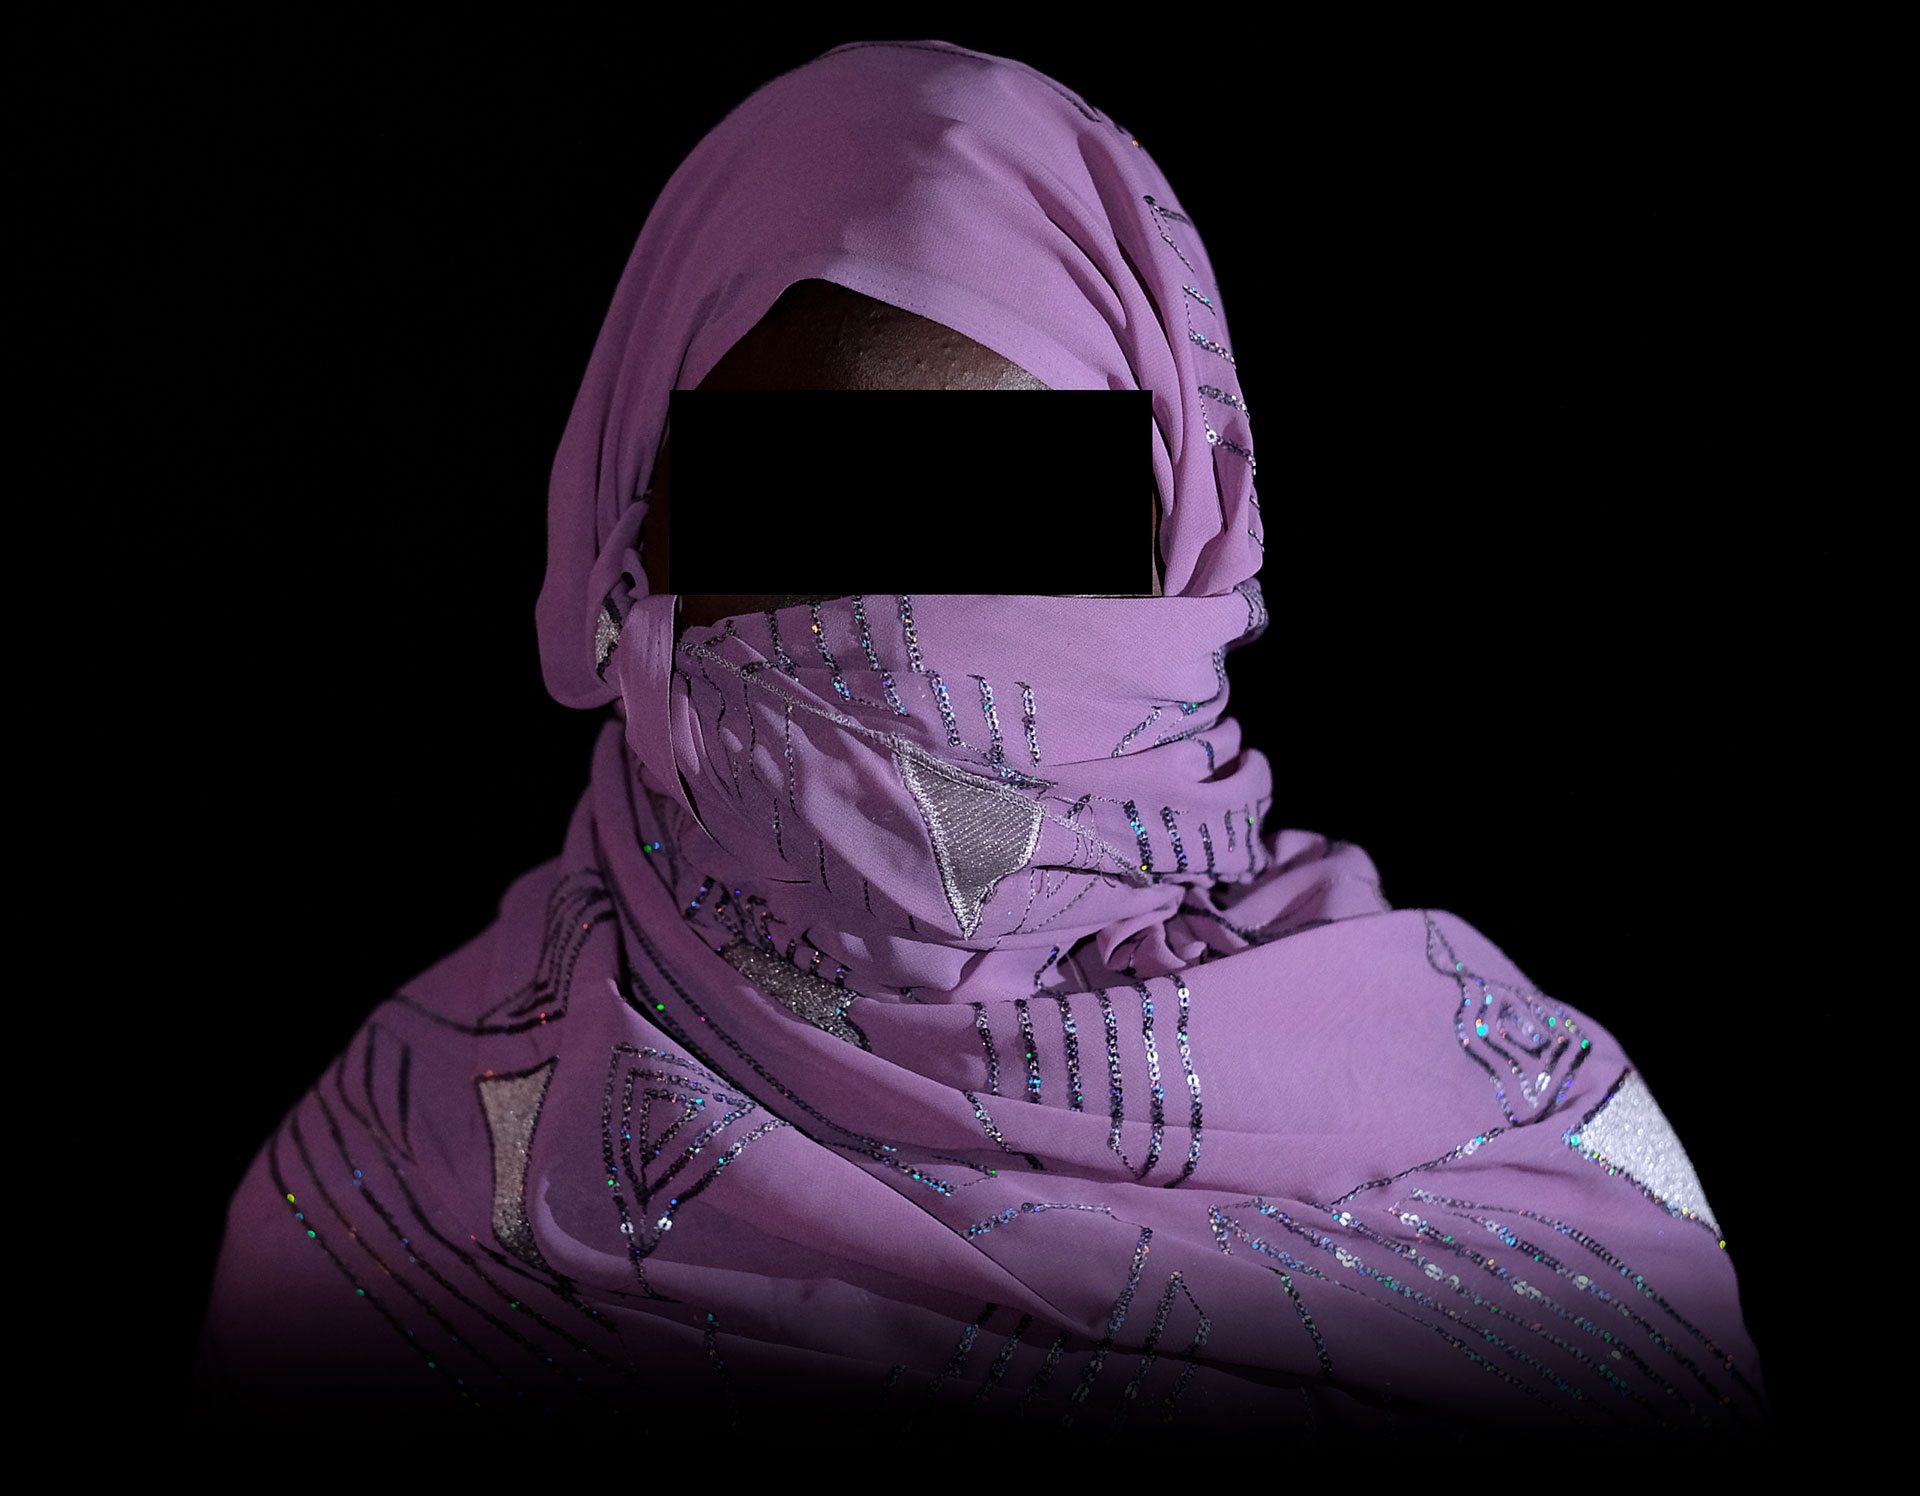 Fati was four months pregnant when liberated from the insurgents. Soon after, she says, soldiers medically aborted the pregnancy without telling her. And she was warned: “If you share this with anyone, you will be seriously beaten.”